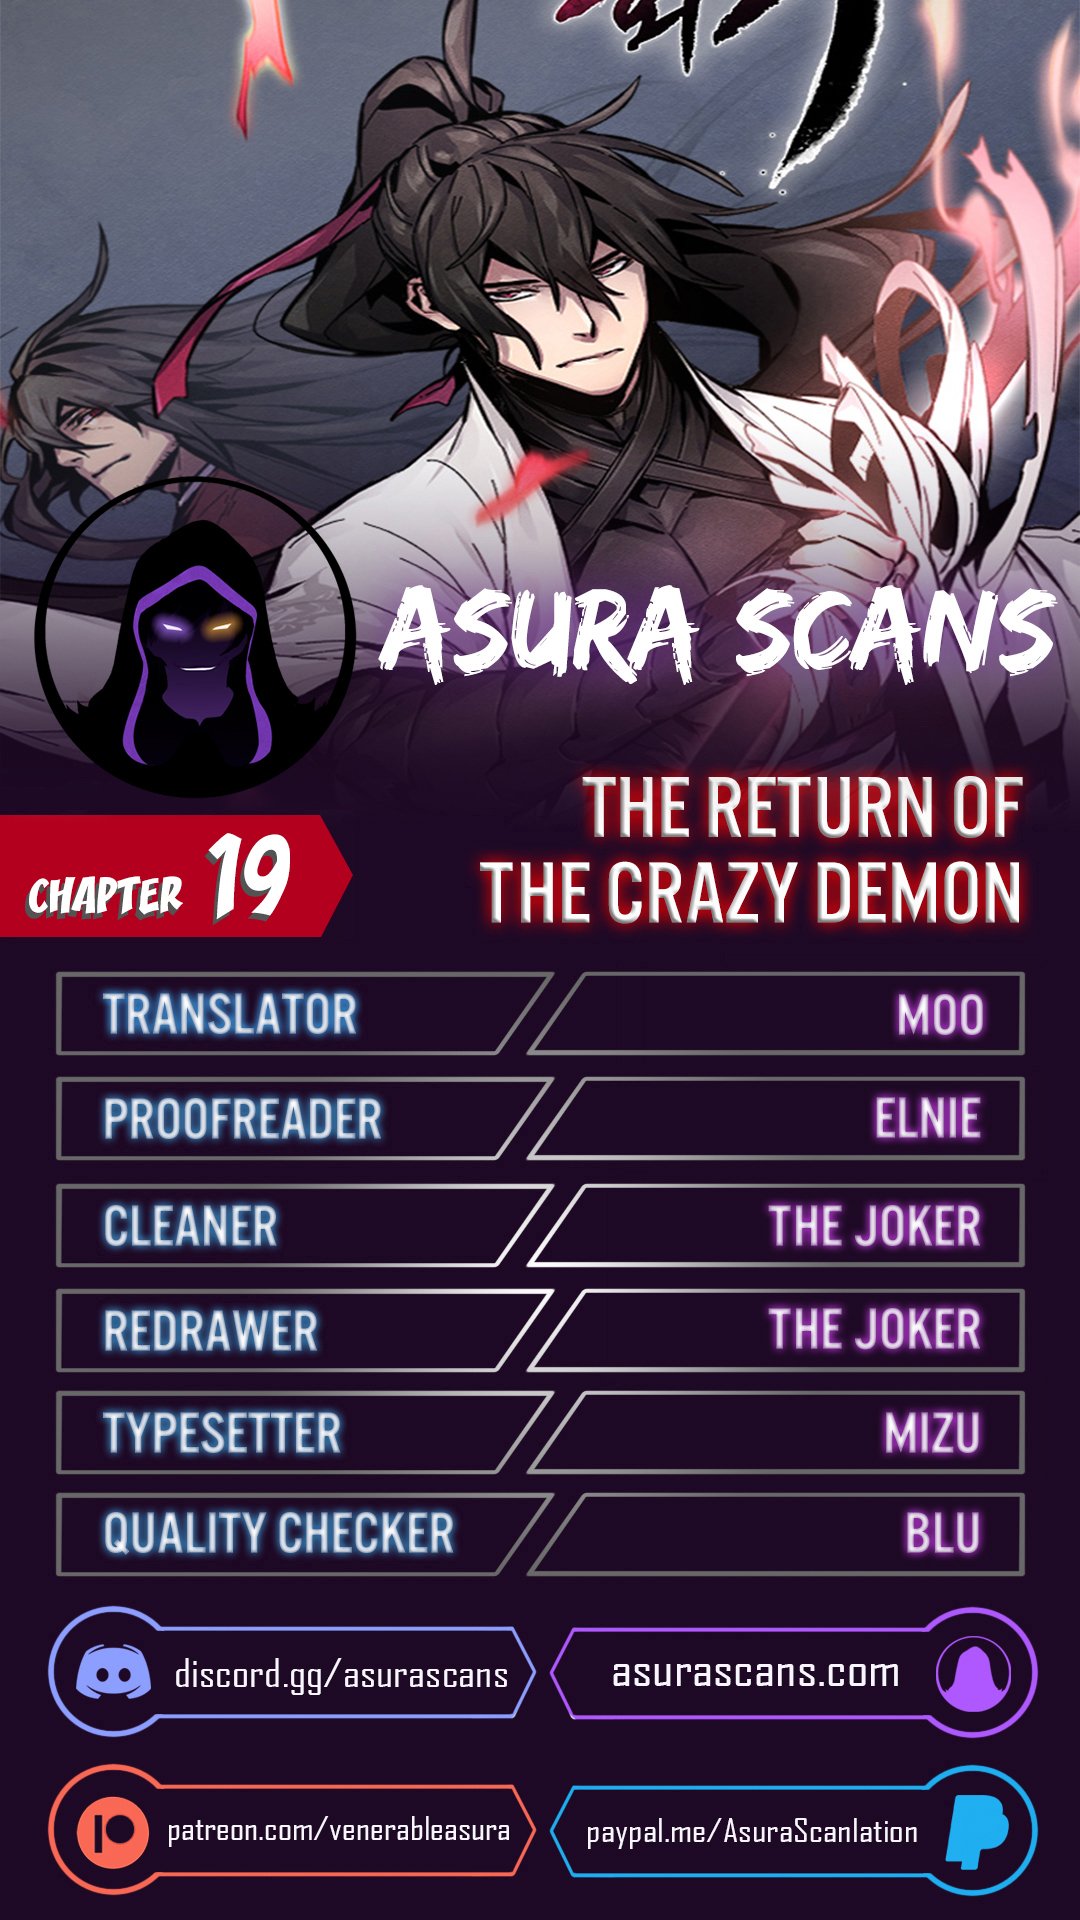 The Return of the Crazy Demon - Chapter 18560 - Image 1